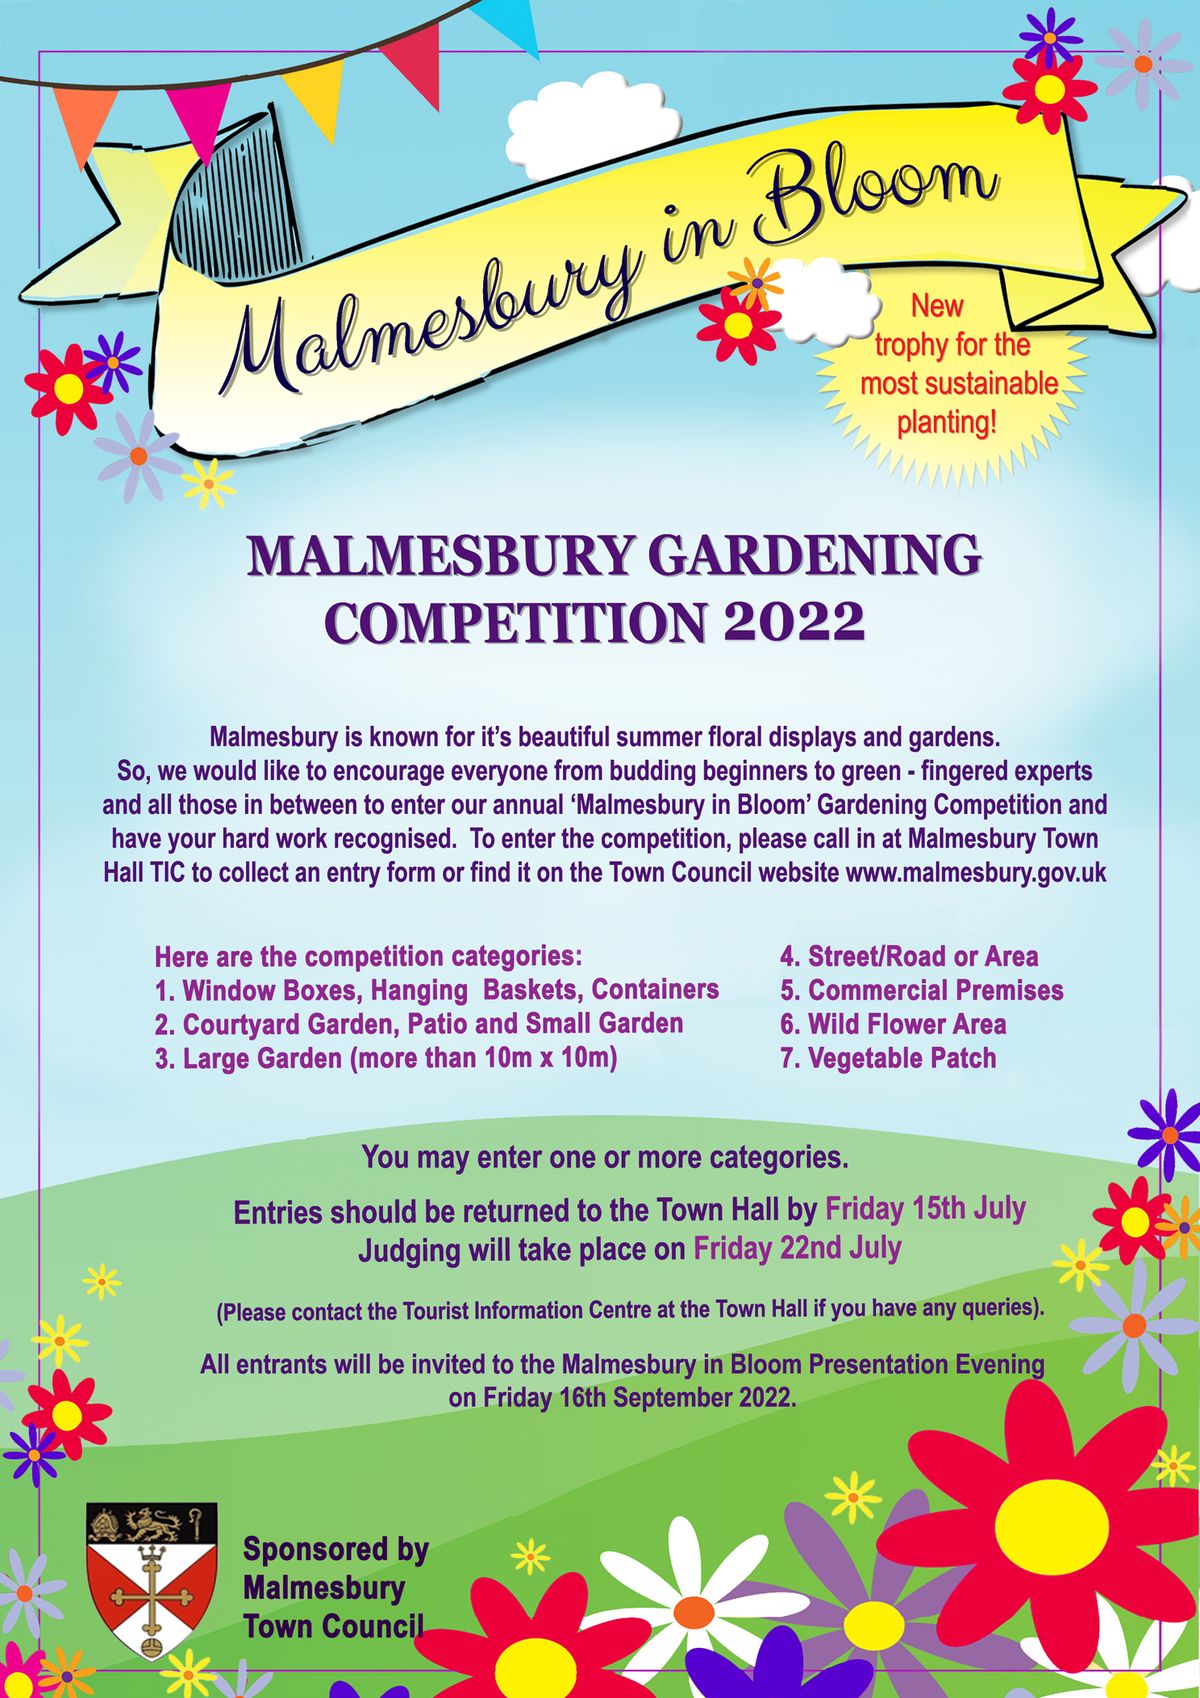 Malmesbury in Bloom Gardening Competition 2022